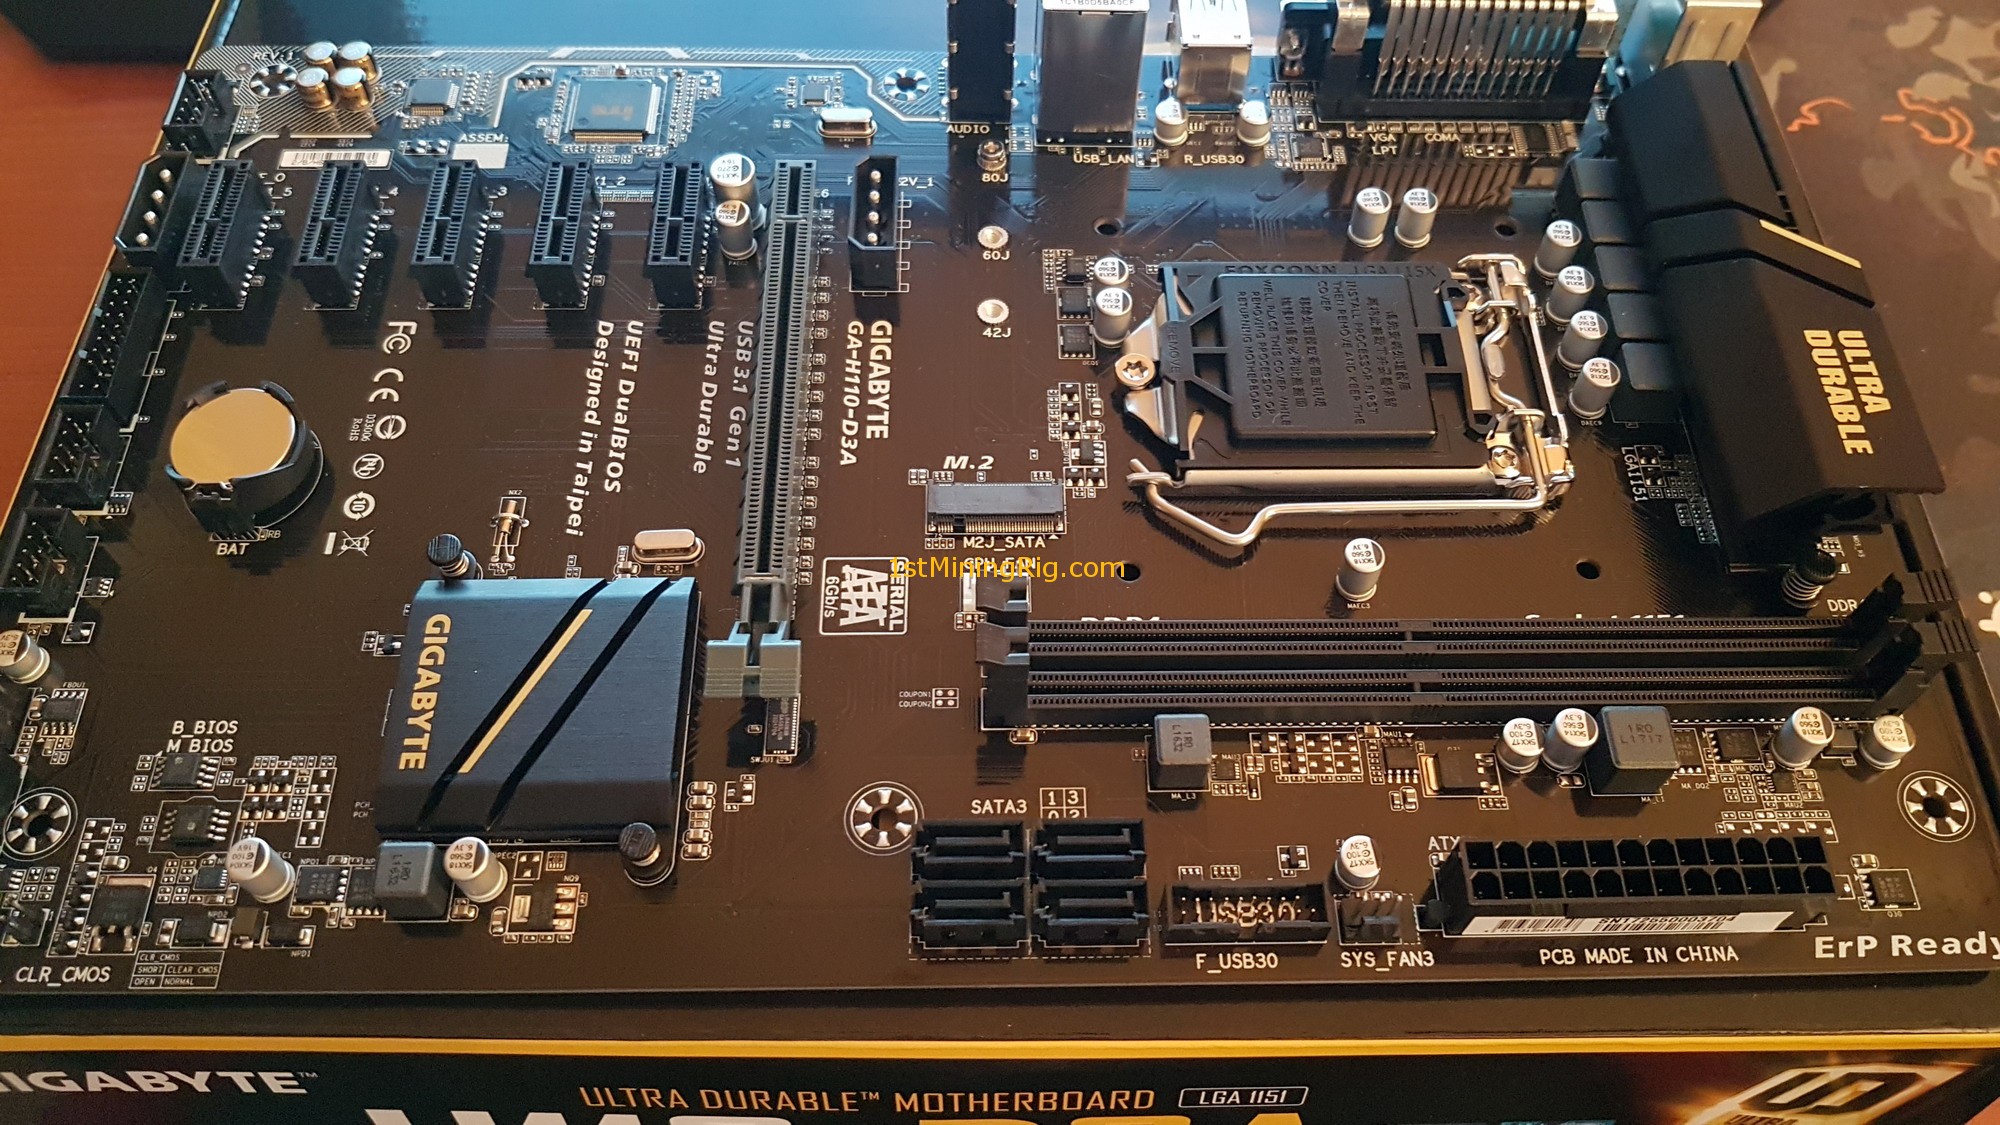 Motherboard H - D3A for gaming | Tom's Hardware Forum